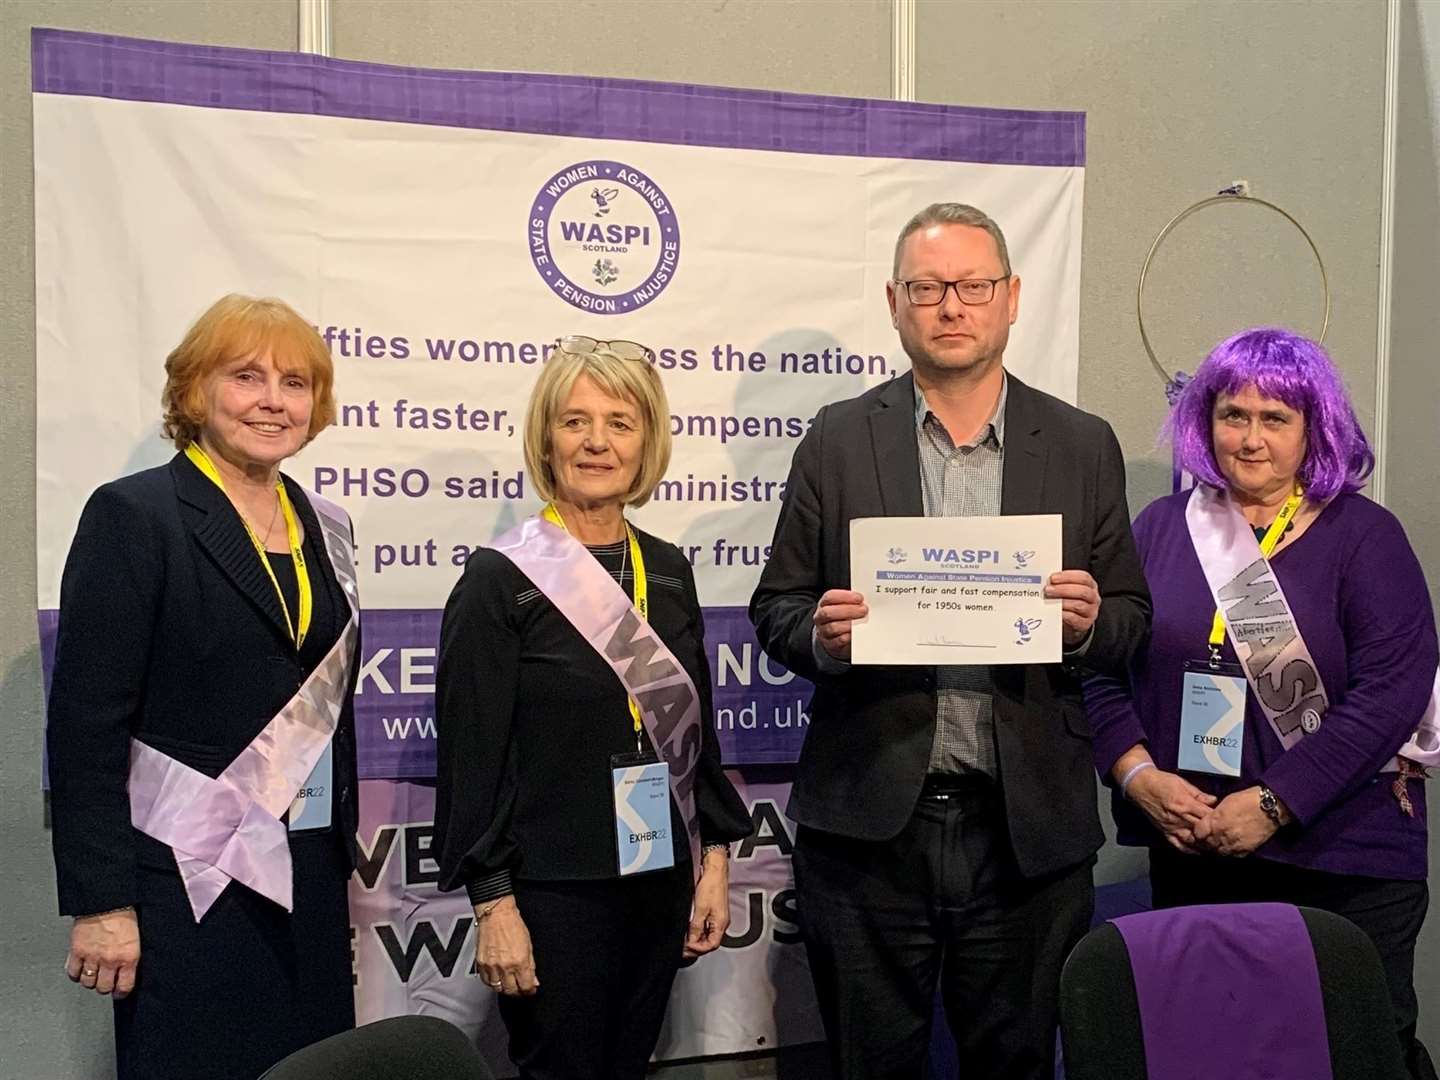 Richard Thomson MP with campaigners at a previous WASPI meeting at Westminster.